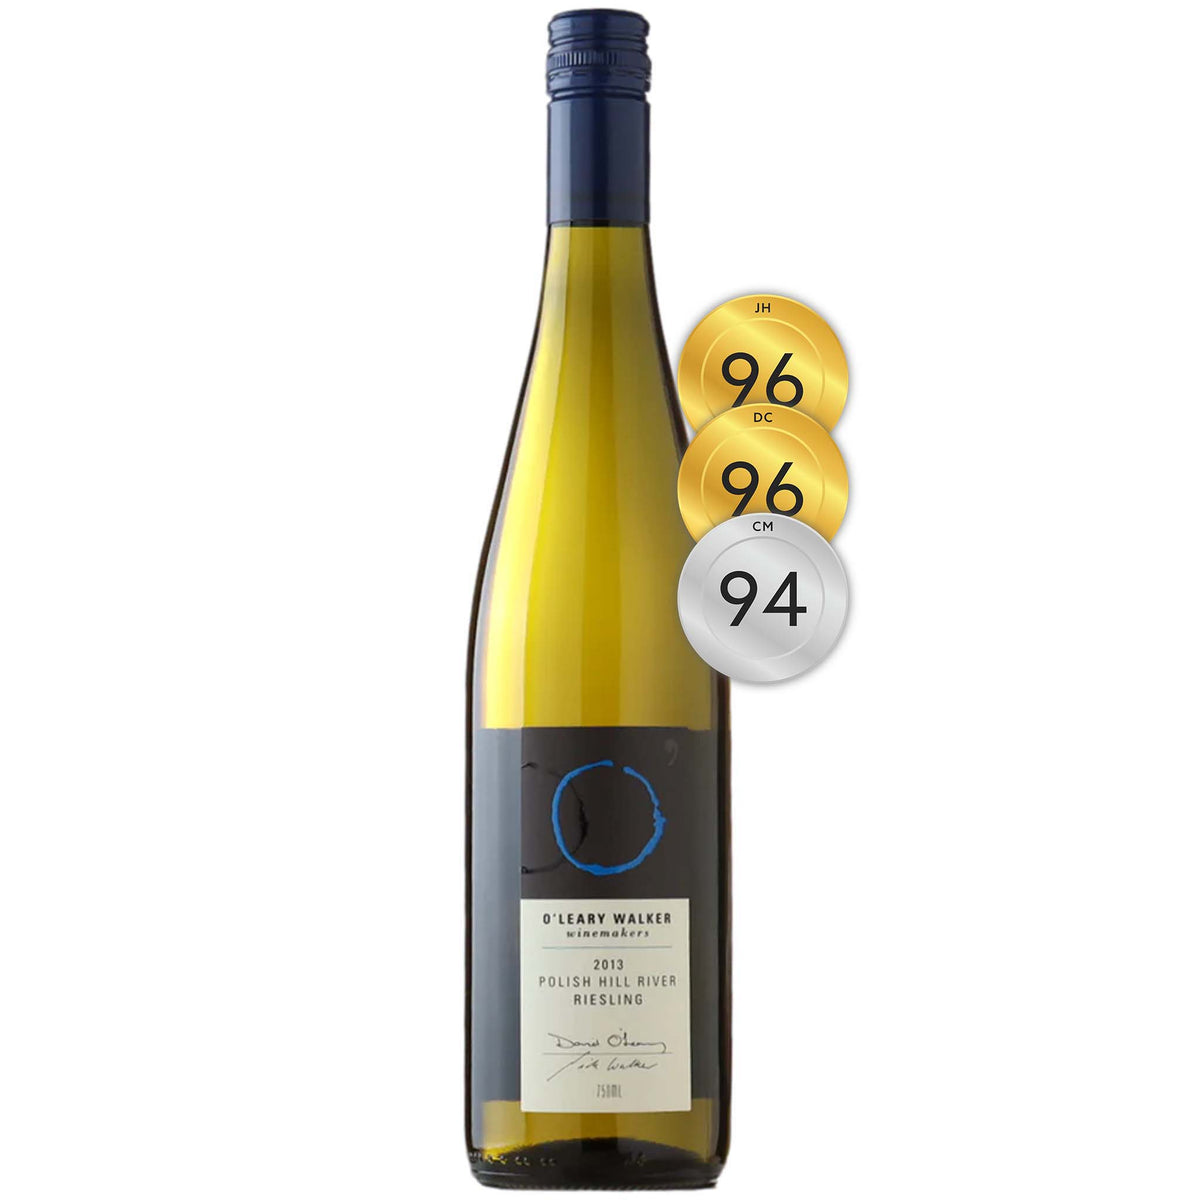 O'Leary Walker Polish Hill River Riesling 2013